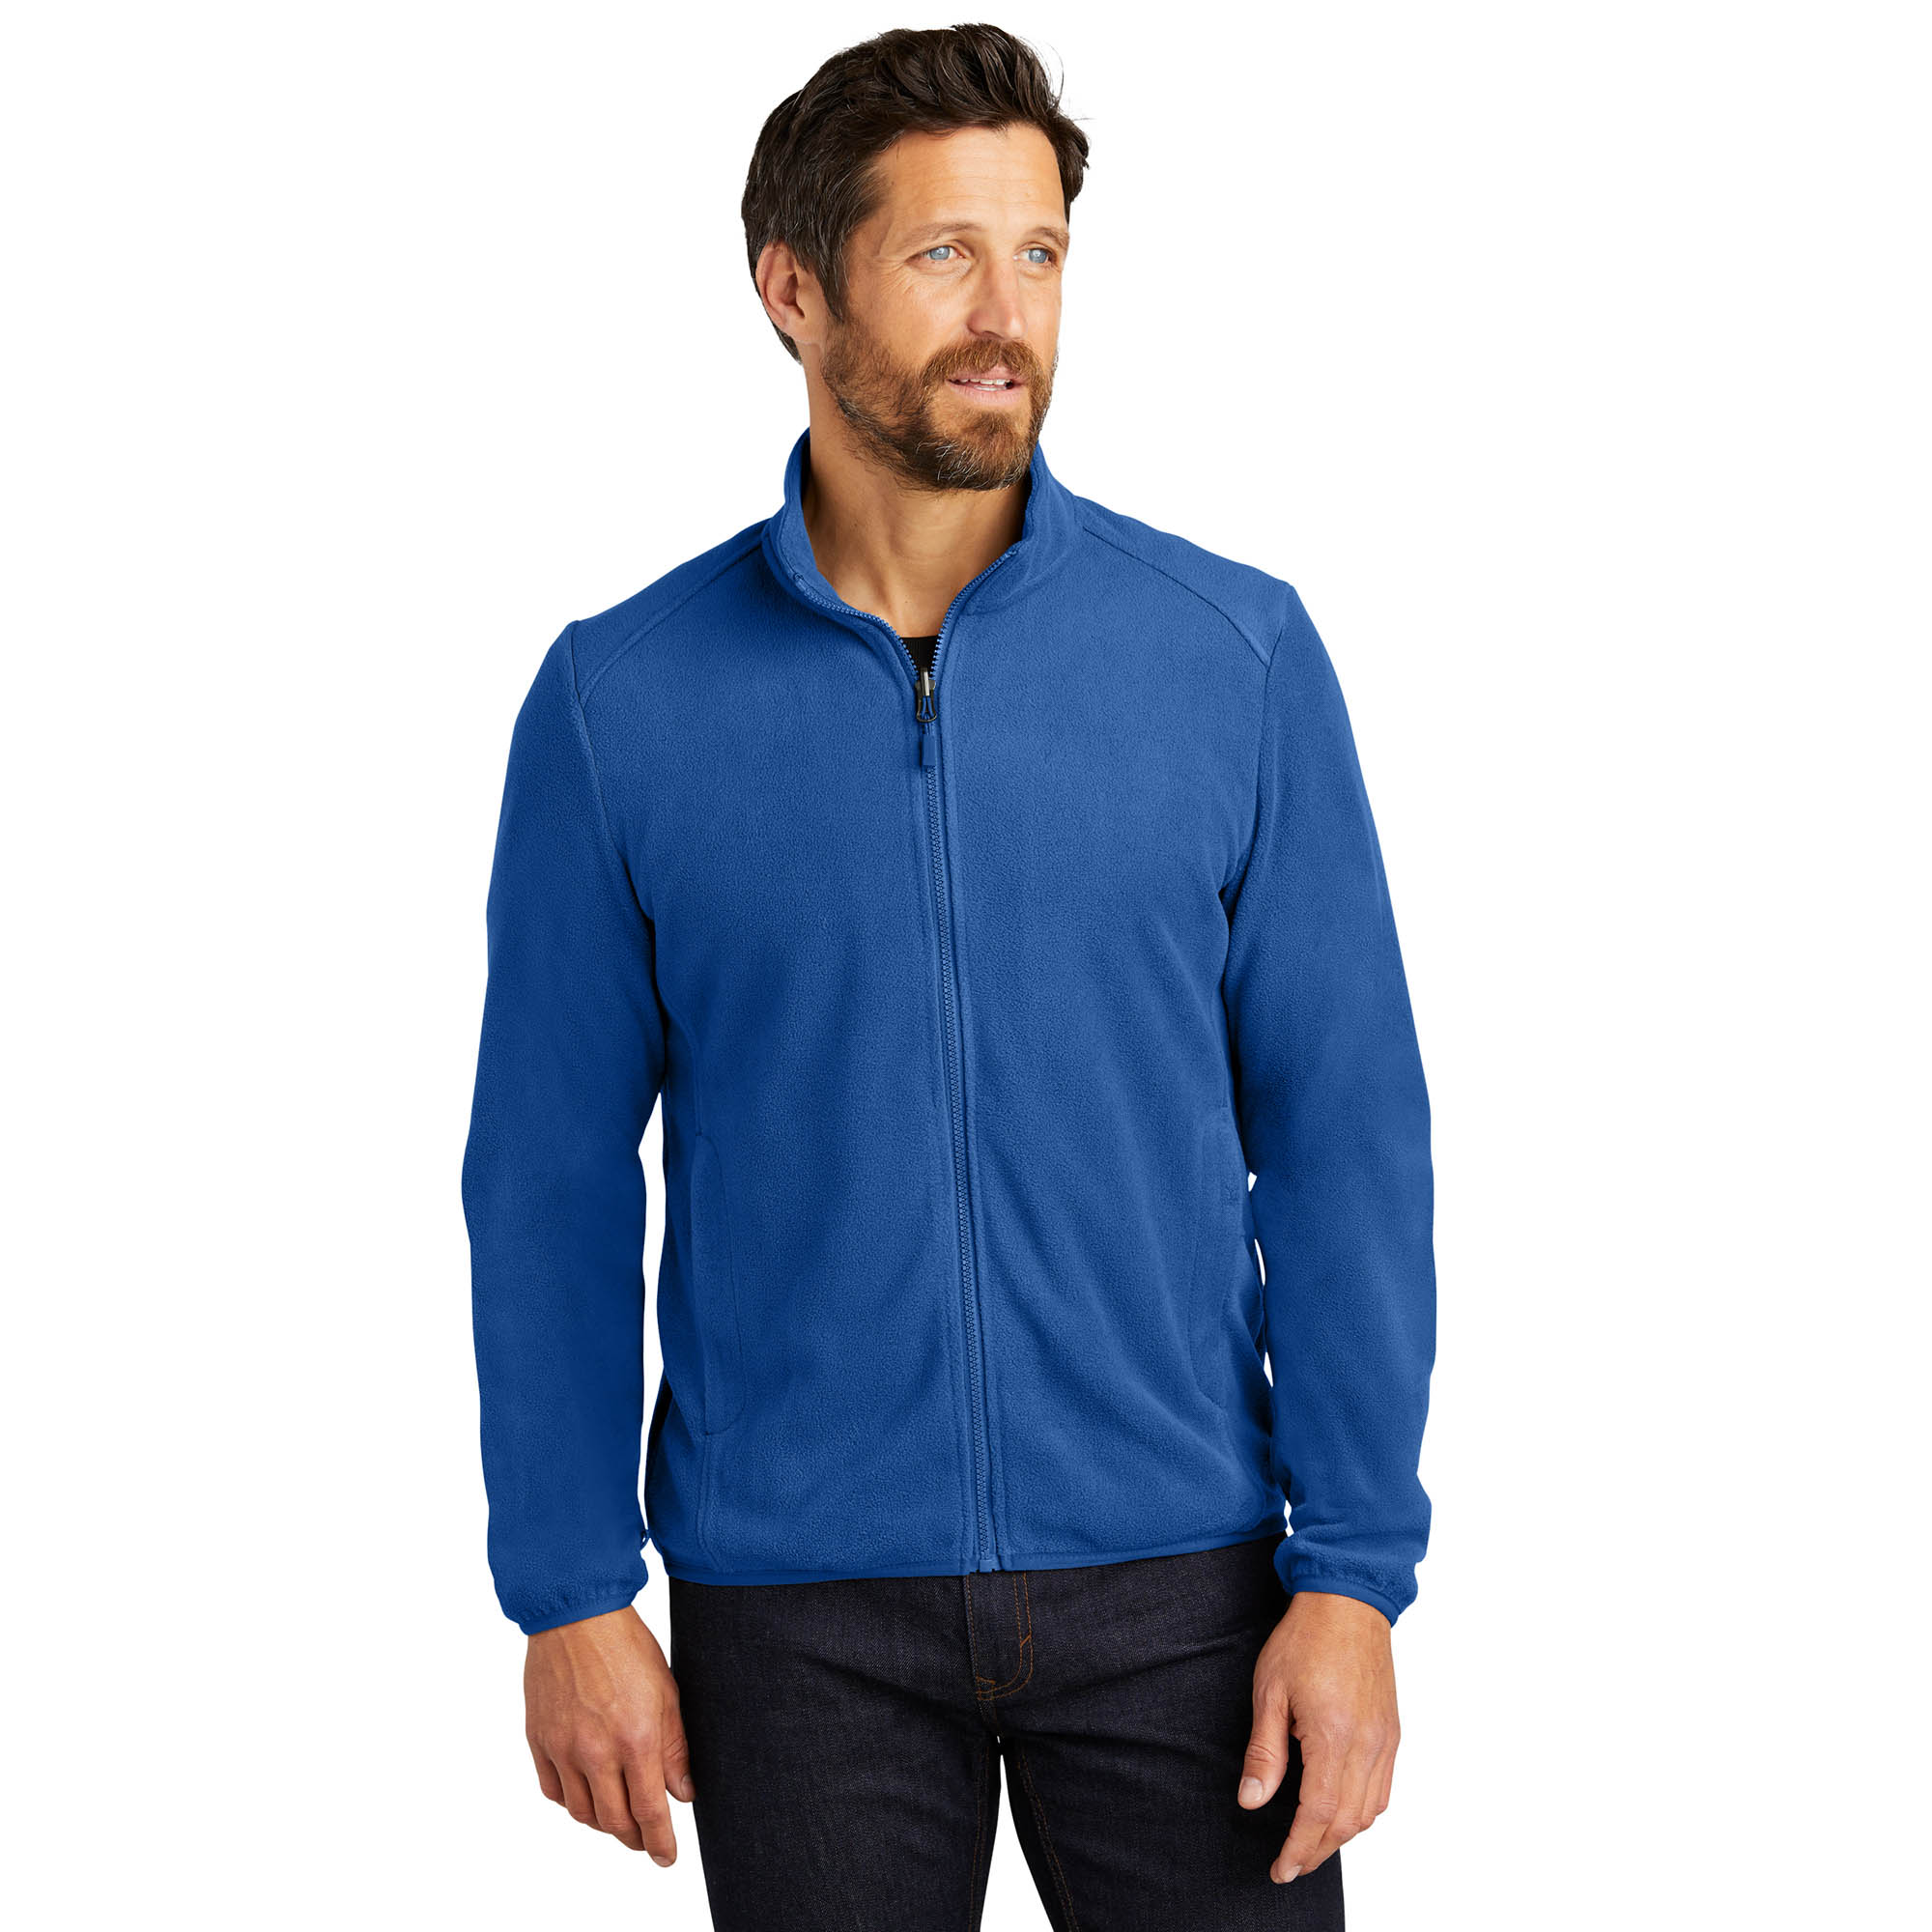 Port Authority J123 All-Weather 3-in-1 Jacket - True Blue | Full Source